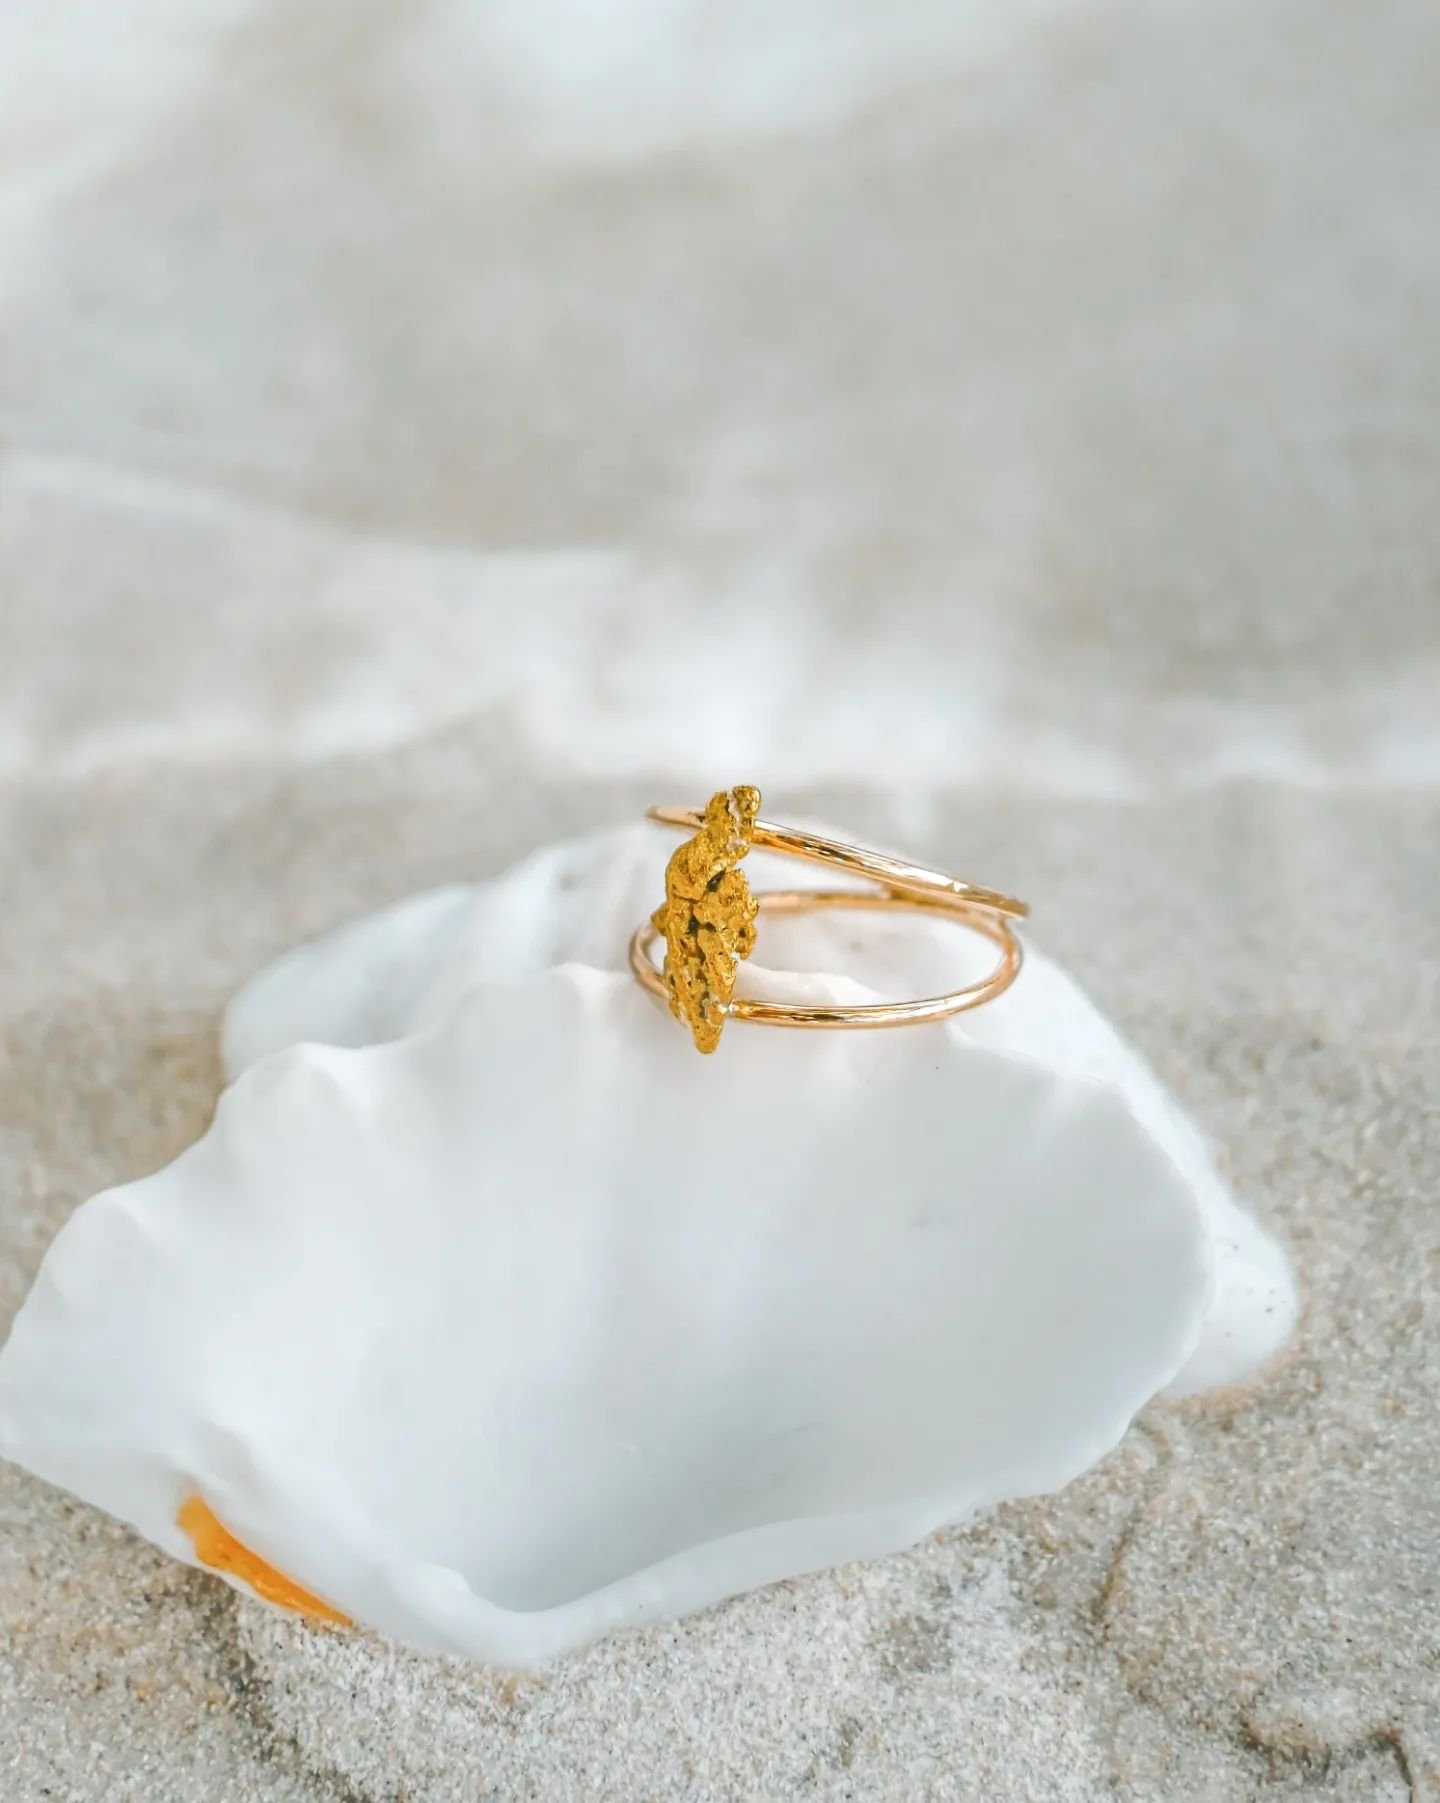 ✨ Handcrafted with love and a touch of nature's beauty ✨

Introducing this stunning ring crafted in 9k yellow gold, featuring a locally sourced gold nugget at its heart. 

Each piece tells a story, and this one celebrates the raw elegance of nature. 